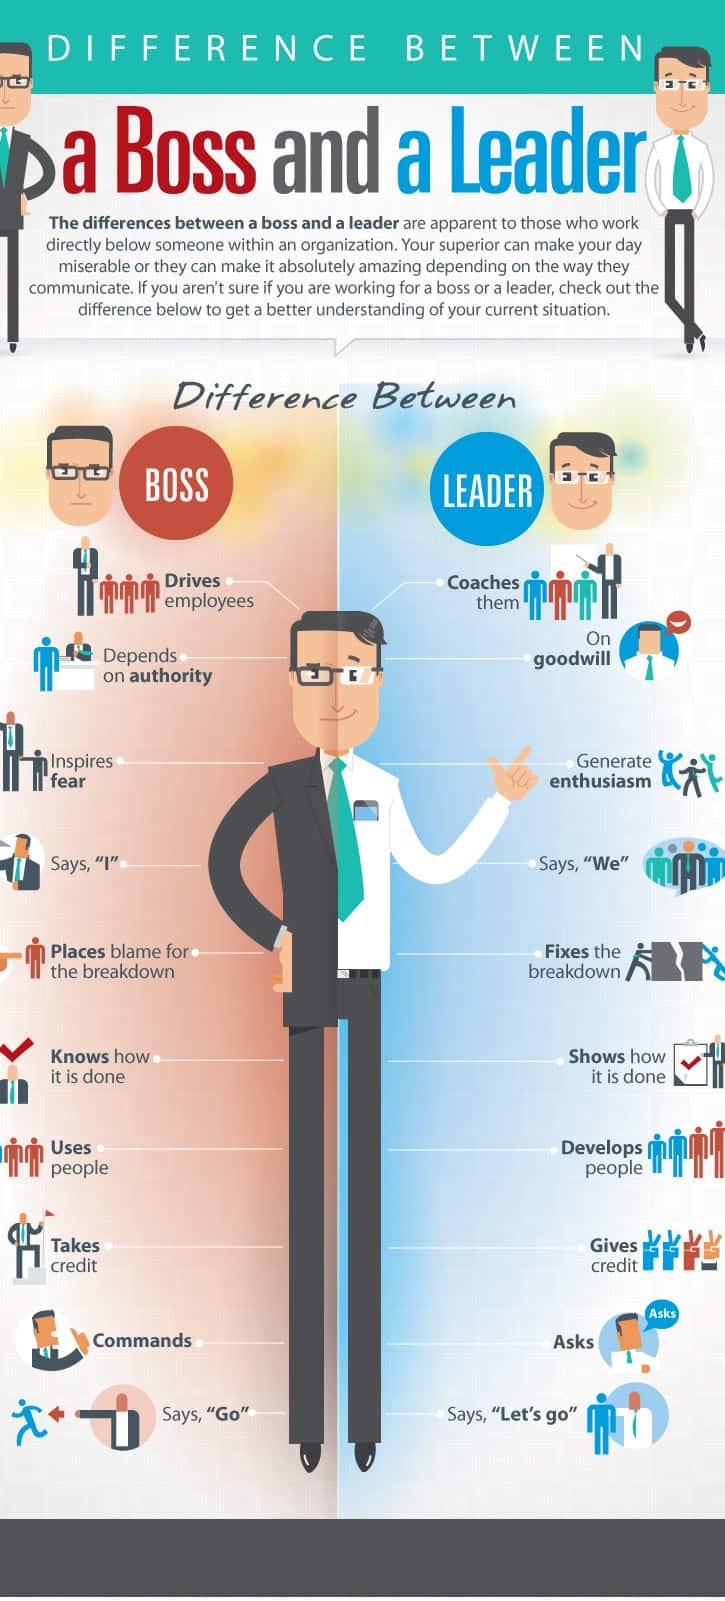 Do You Have A Boss Or A Leader?